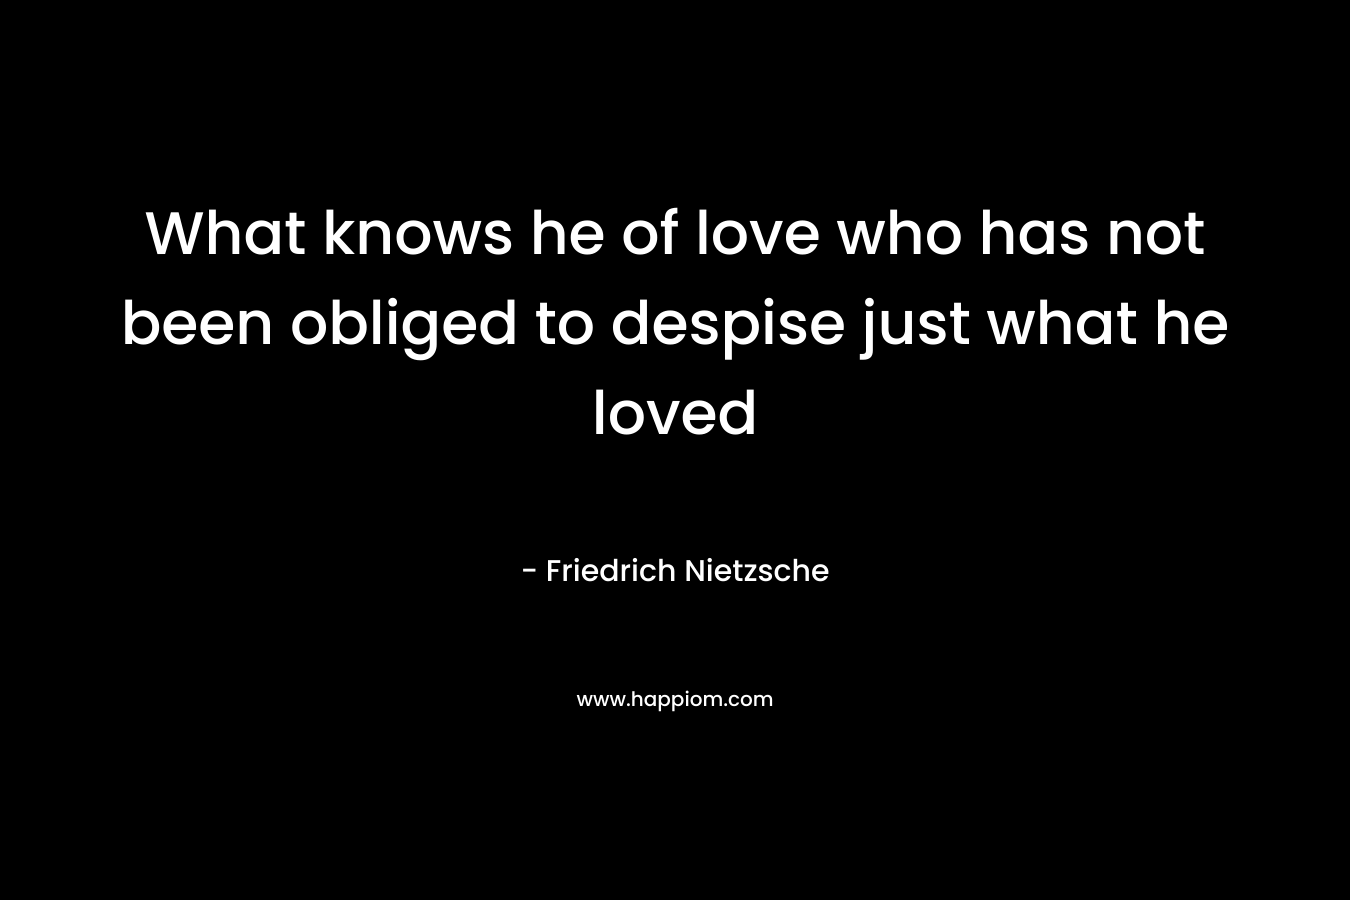 What knows he of love who has not been obliged to despise just what he loved